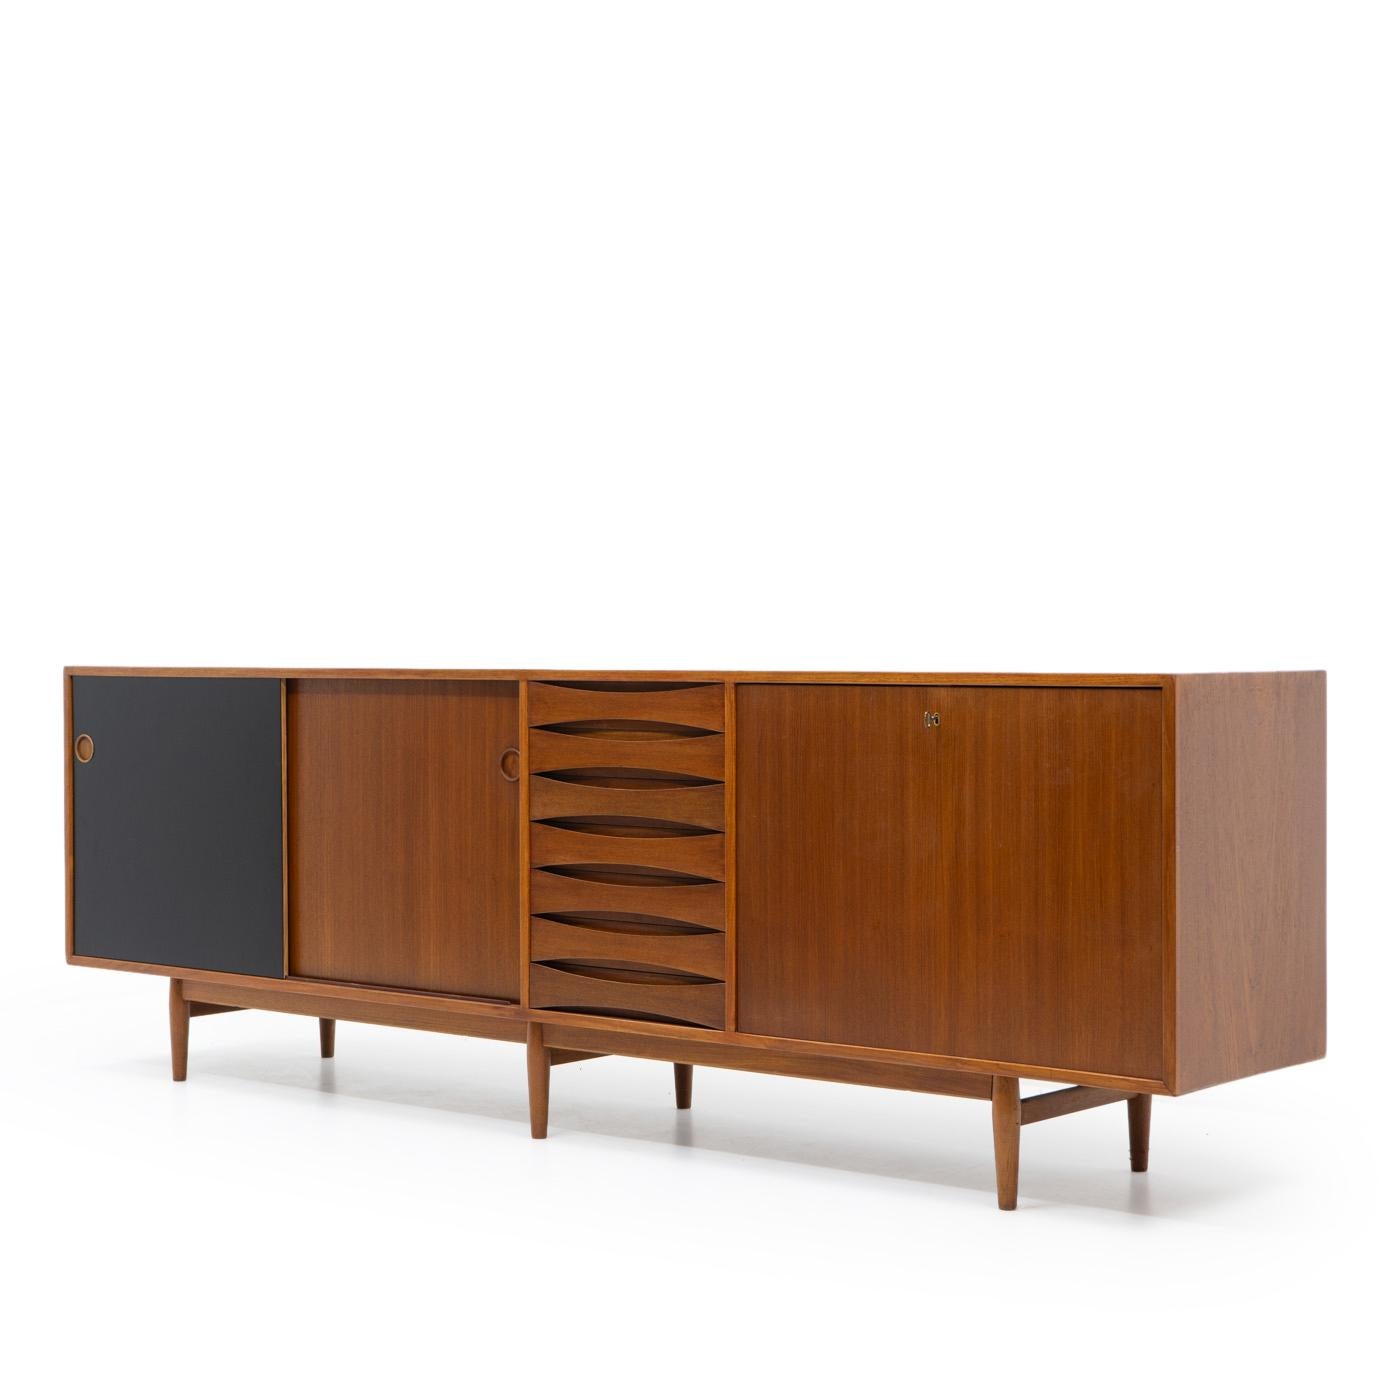 The 1950s Danish-designed Triennale sideboard, created by Arne Vodder (model 29A), is named after its debut at the Milan Triennale. Crafted by the esteemed Danish furniture manufacturer Sibast, this exquisite piece showcases a teak veneer structure.